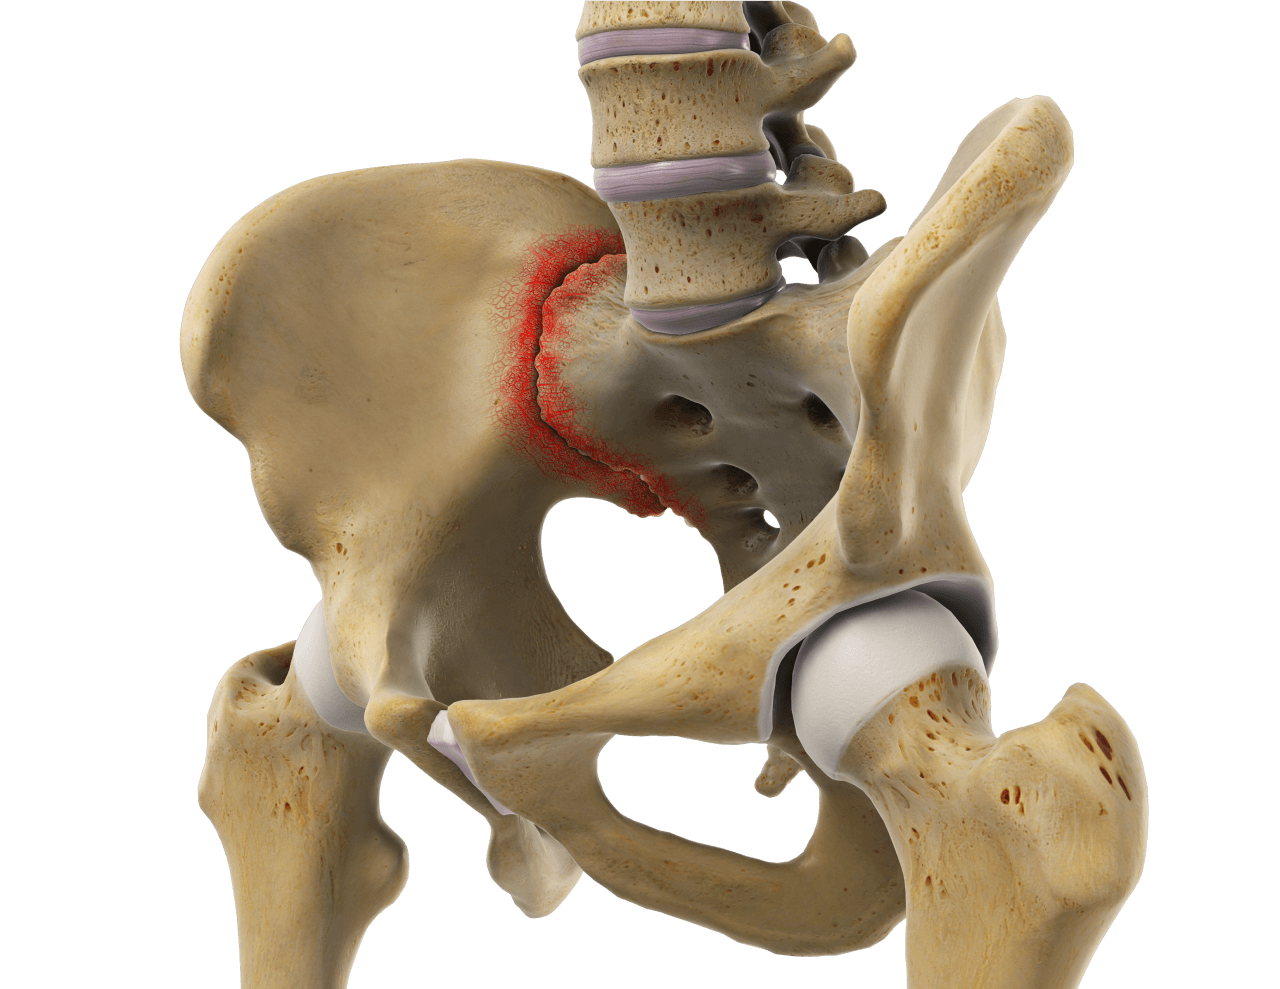 Model of a hip with sacroiliac joint dysfunction